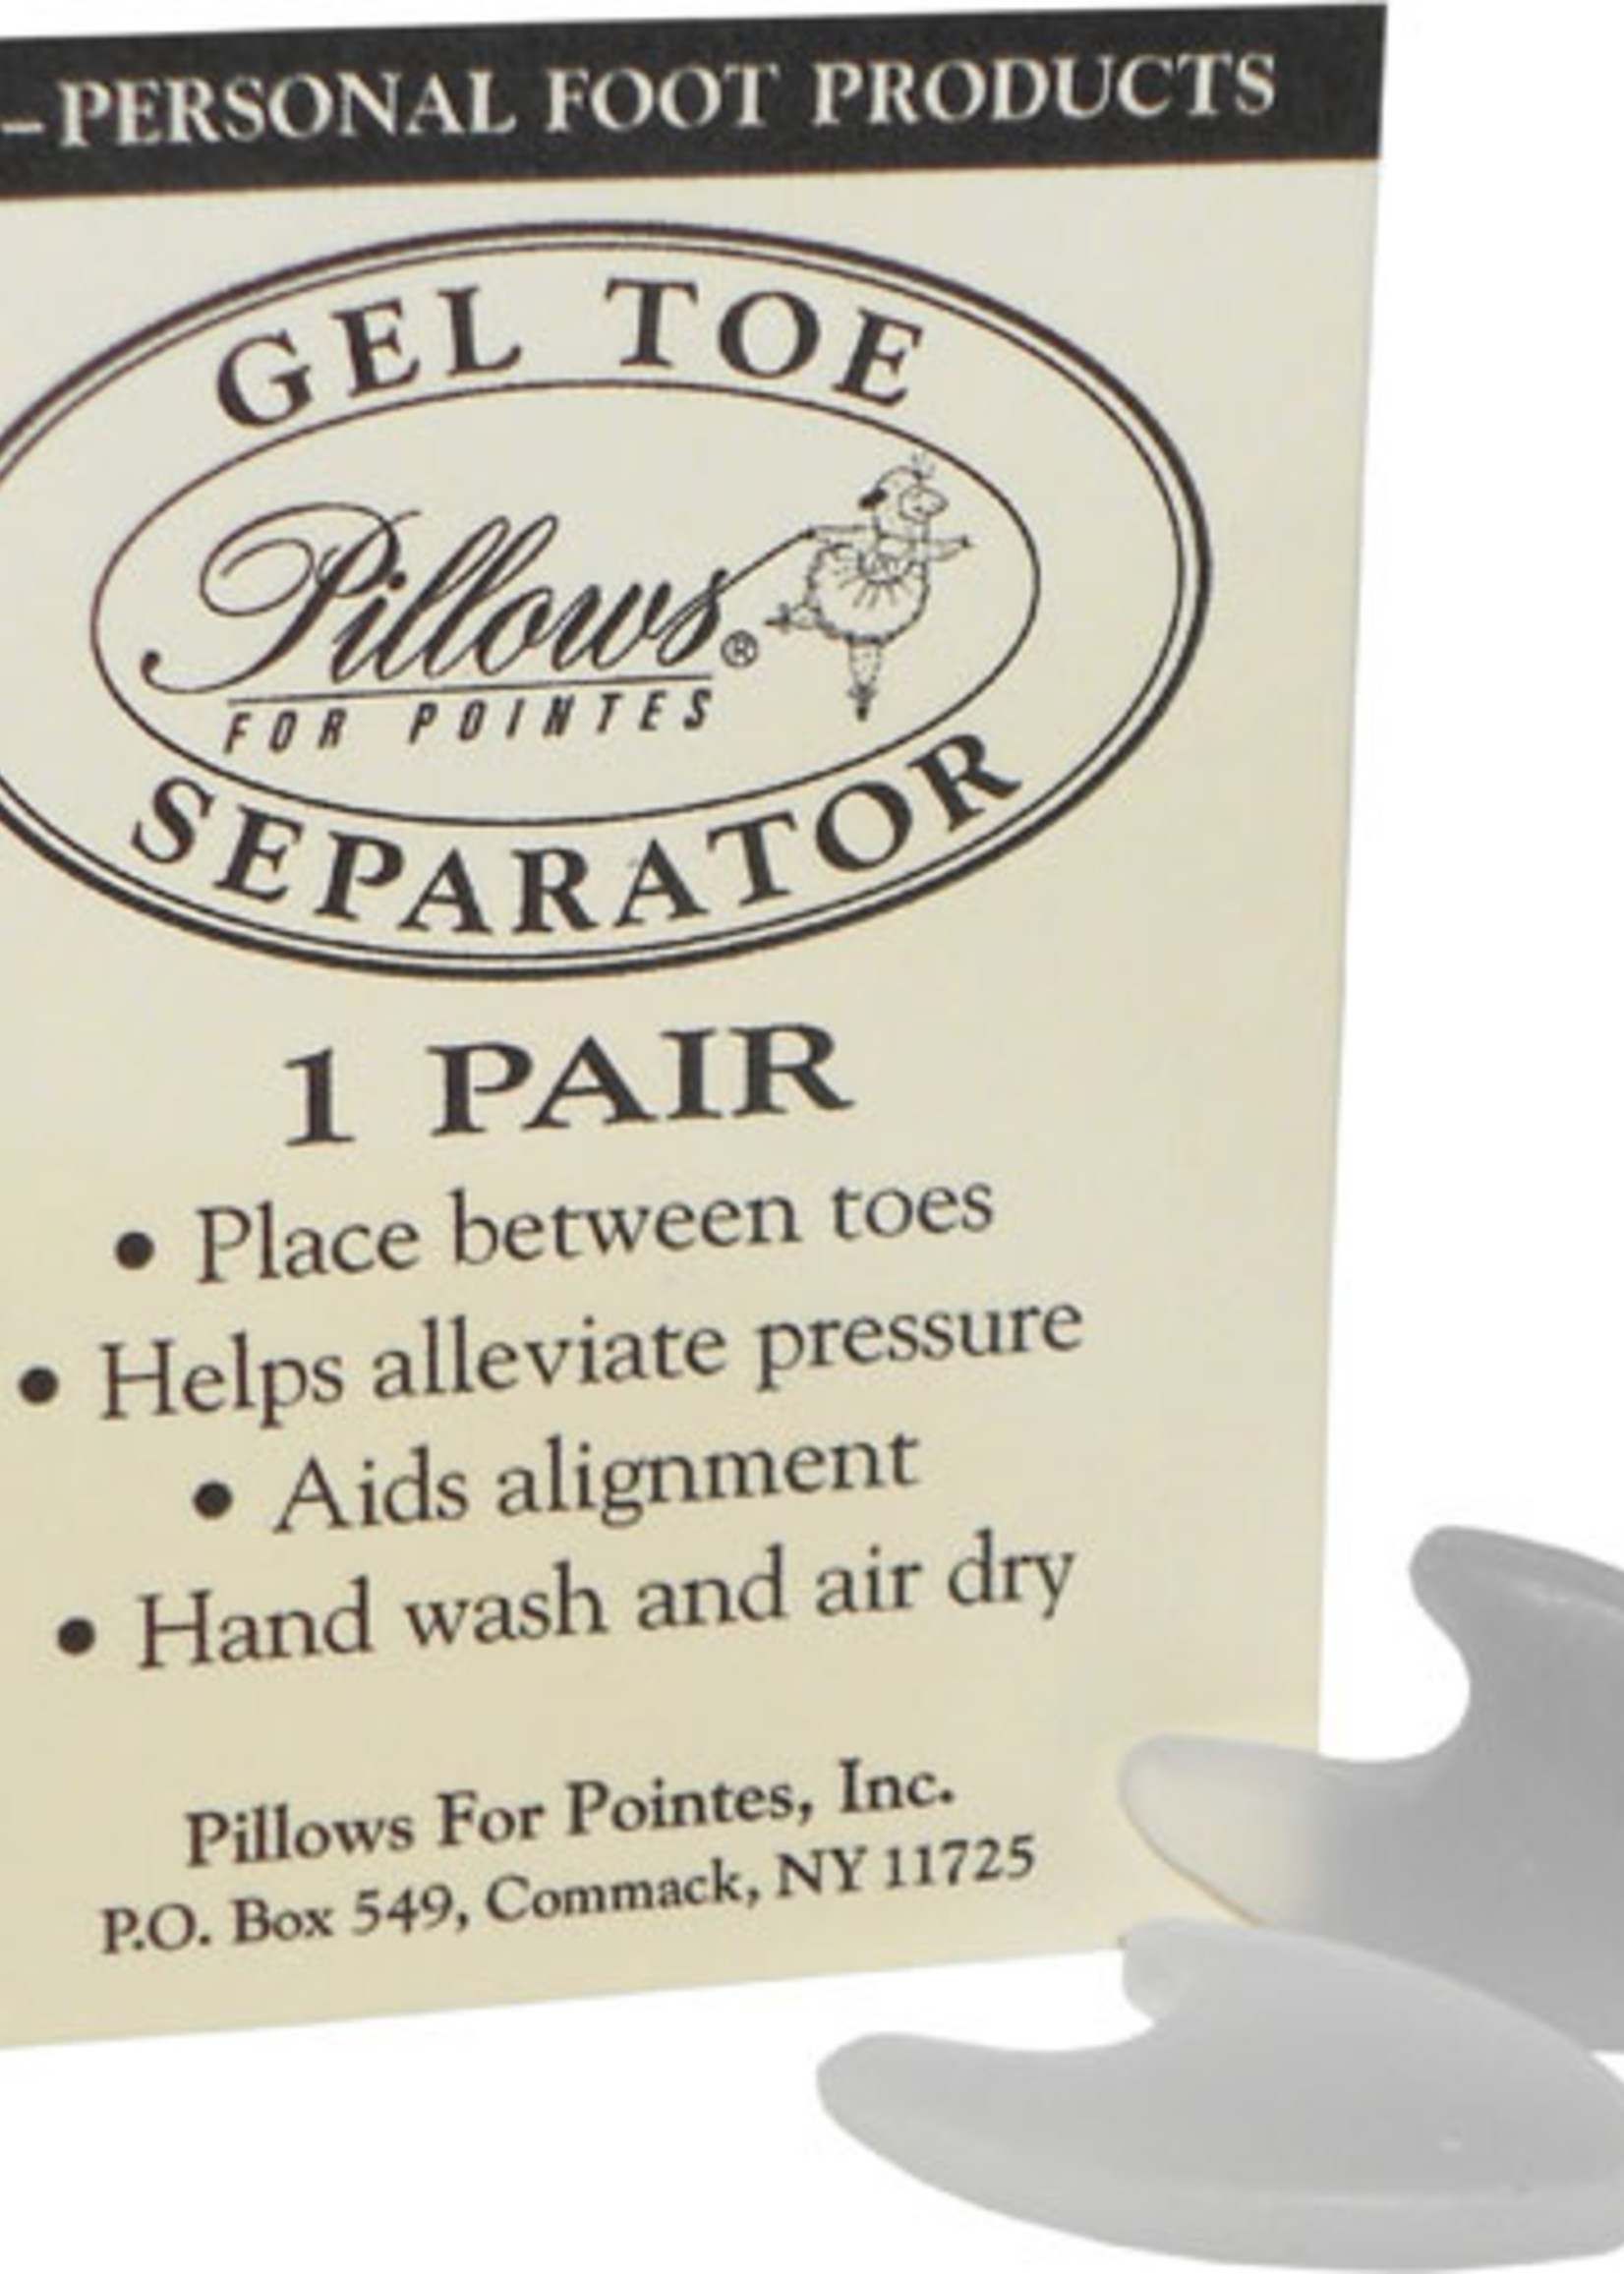 Pillows for Pointe Pillows for Pointe Gel Toe Separator